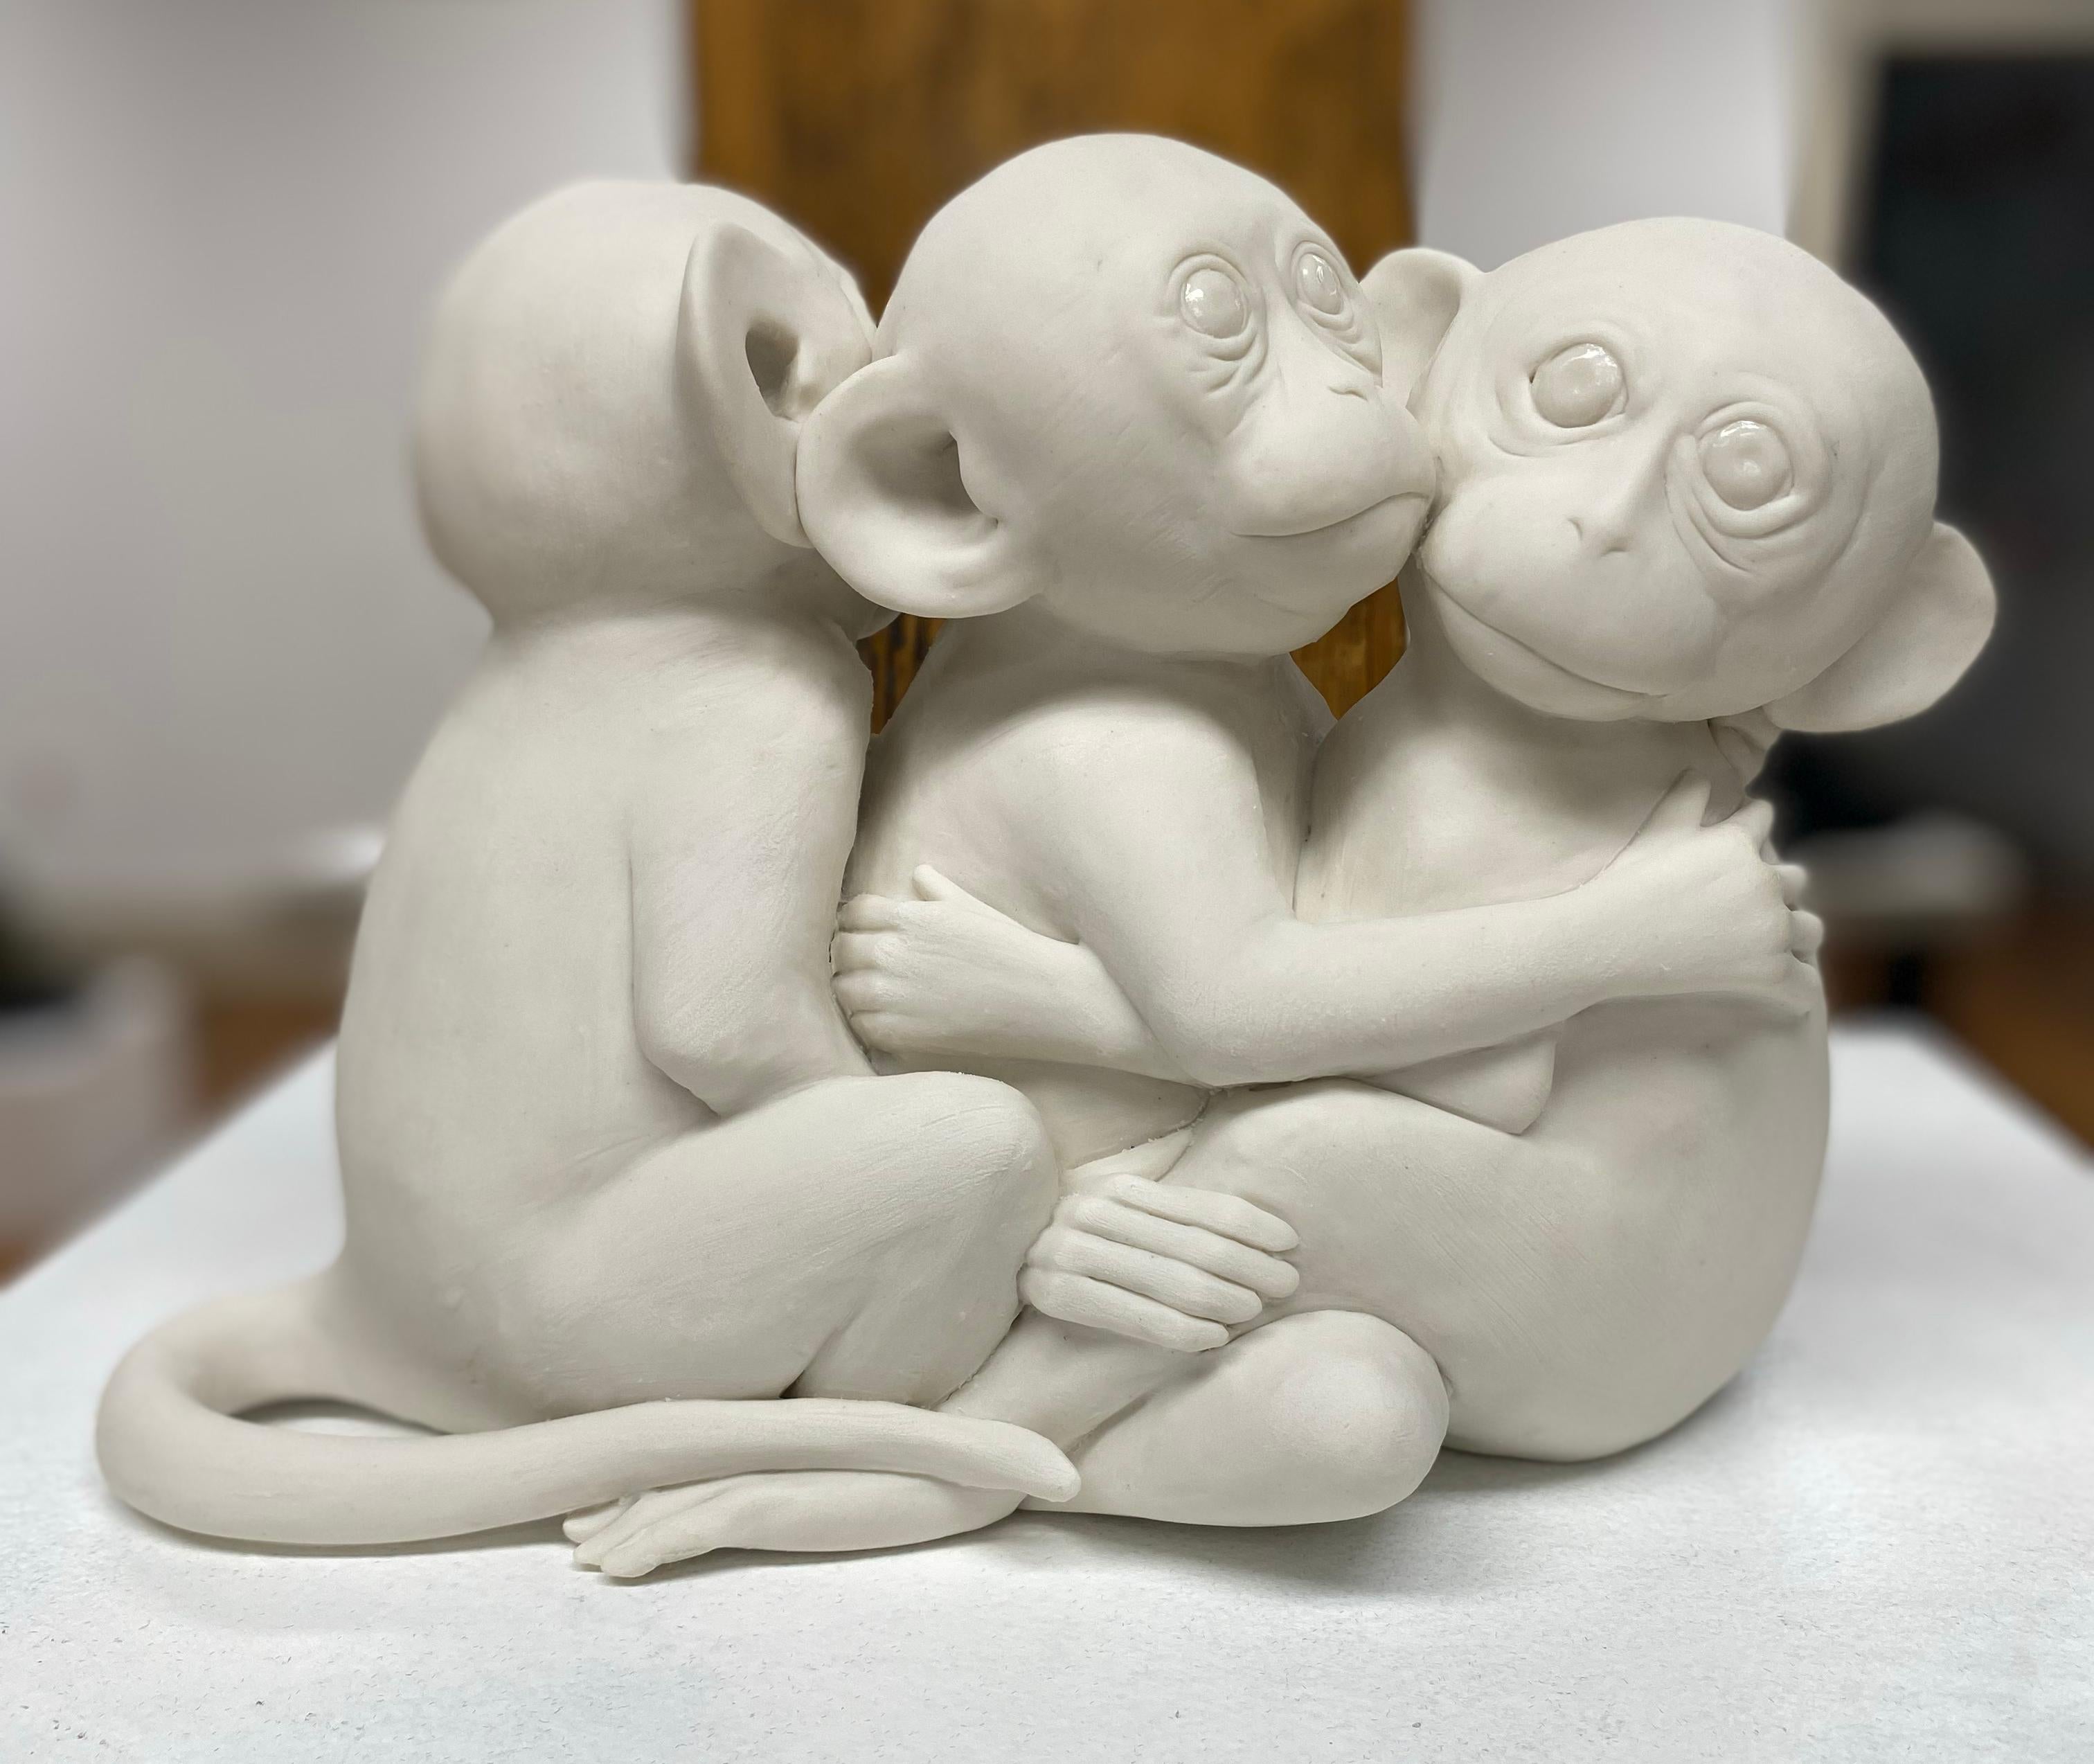 Bethany Krull Figurative Sculpture - Contemporary Sculpture Wall Installation Monkey Huddle Animal Porcelain